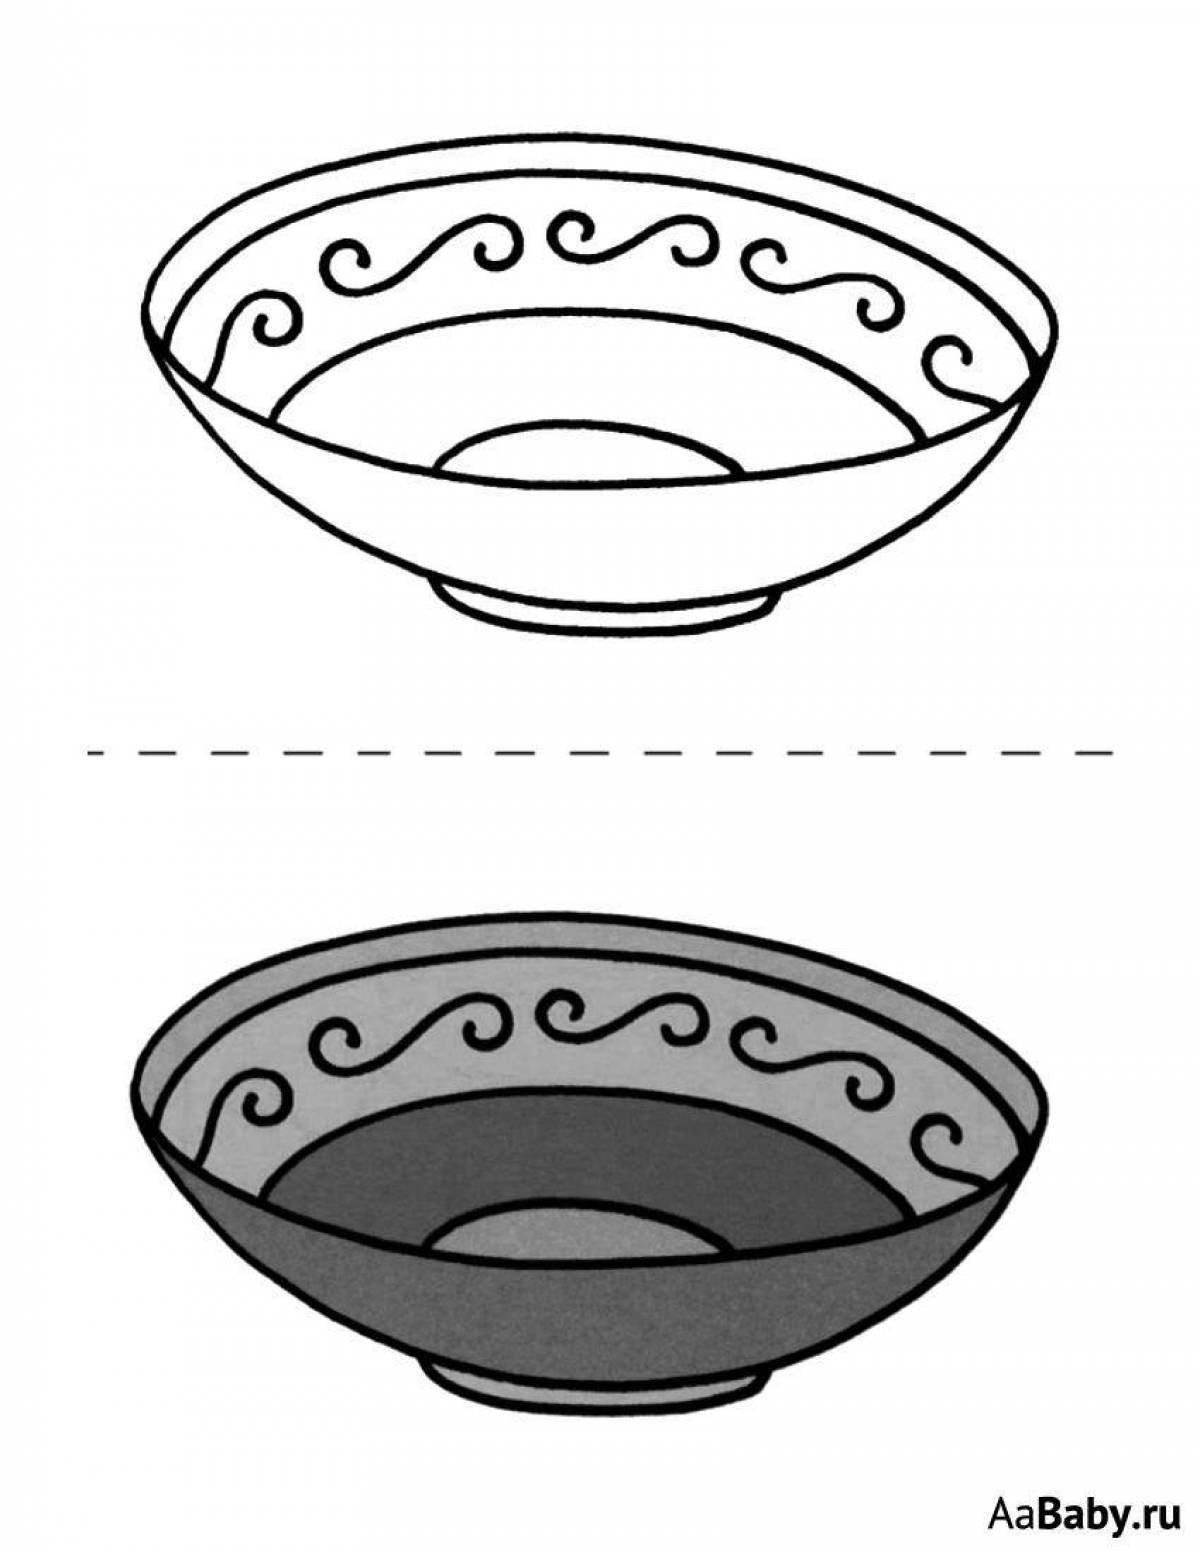 Playful plate coloring page